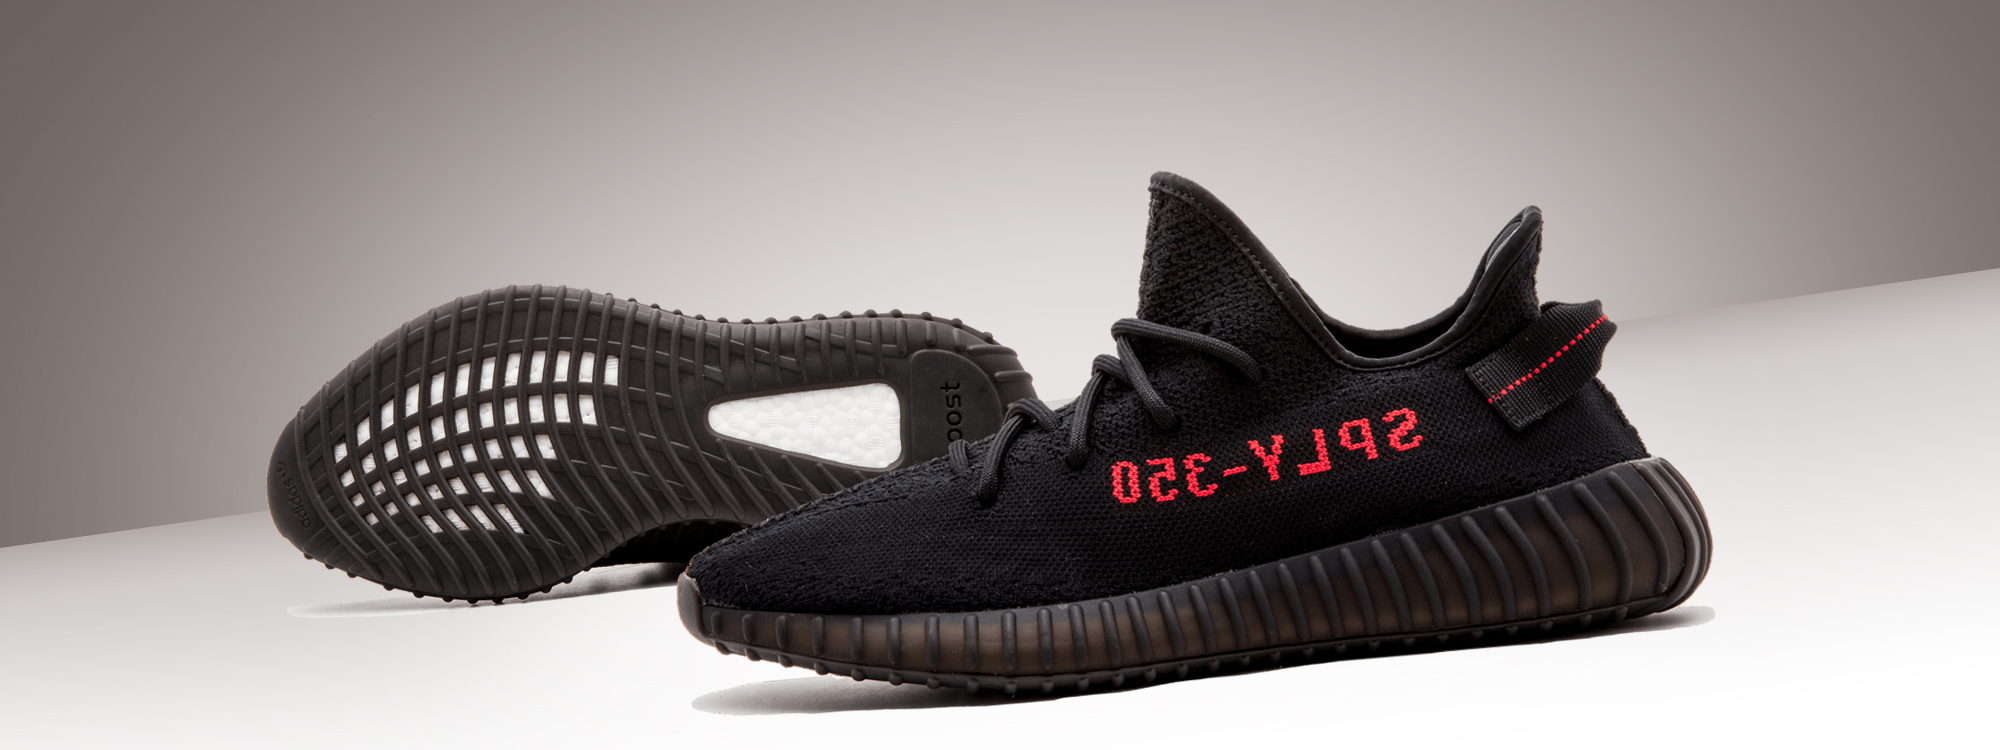  Yeezy Boost 350 V2 Core Black Red / Bred kids outfit